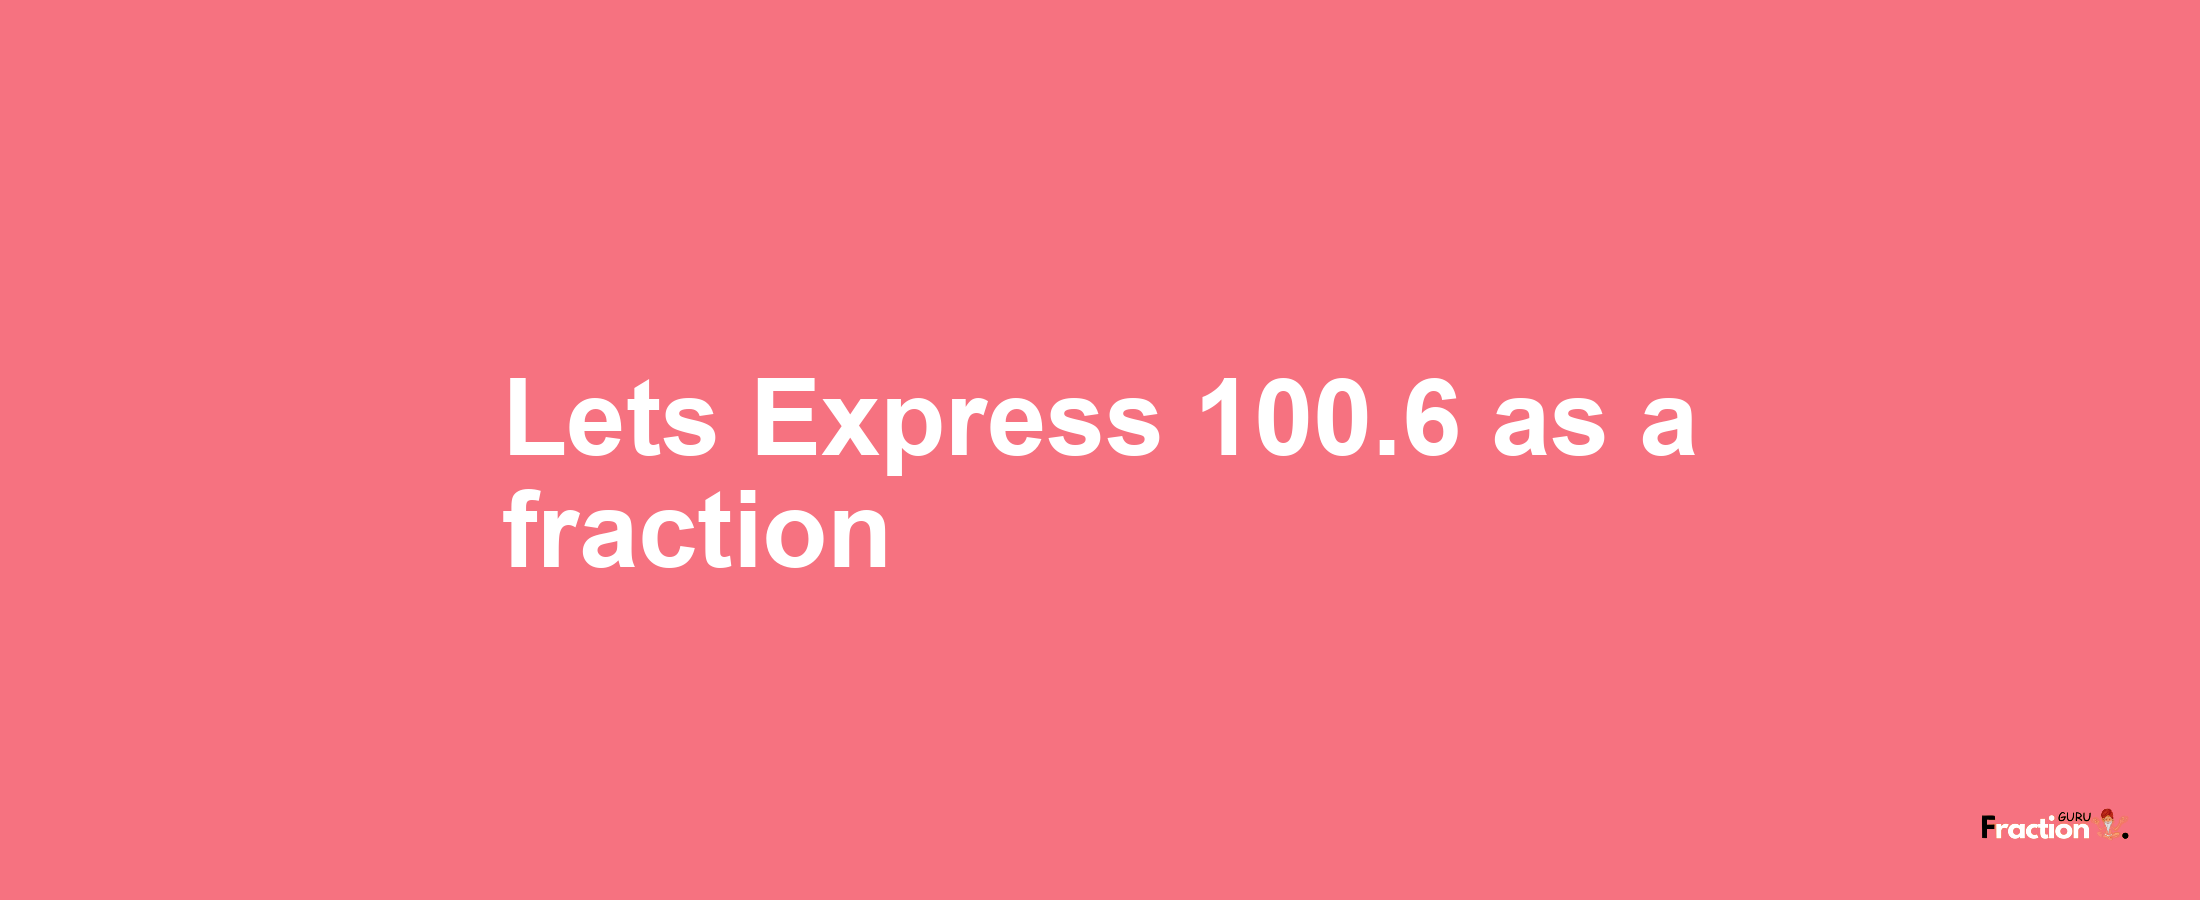 Lets Express 100.6 as afraction